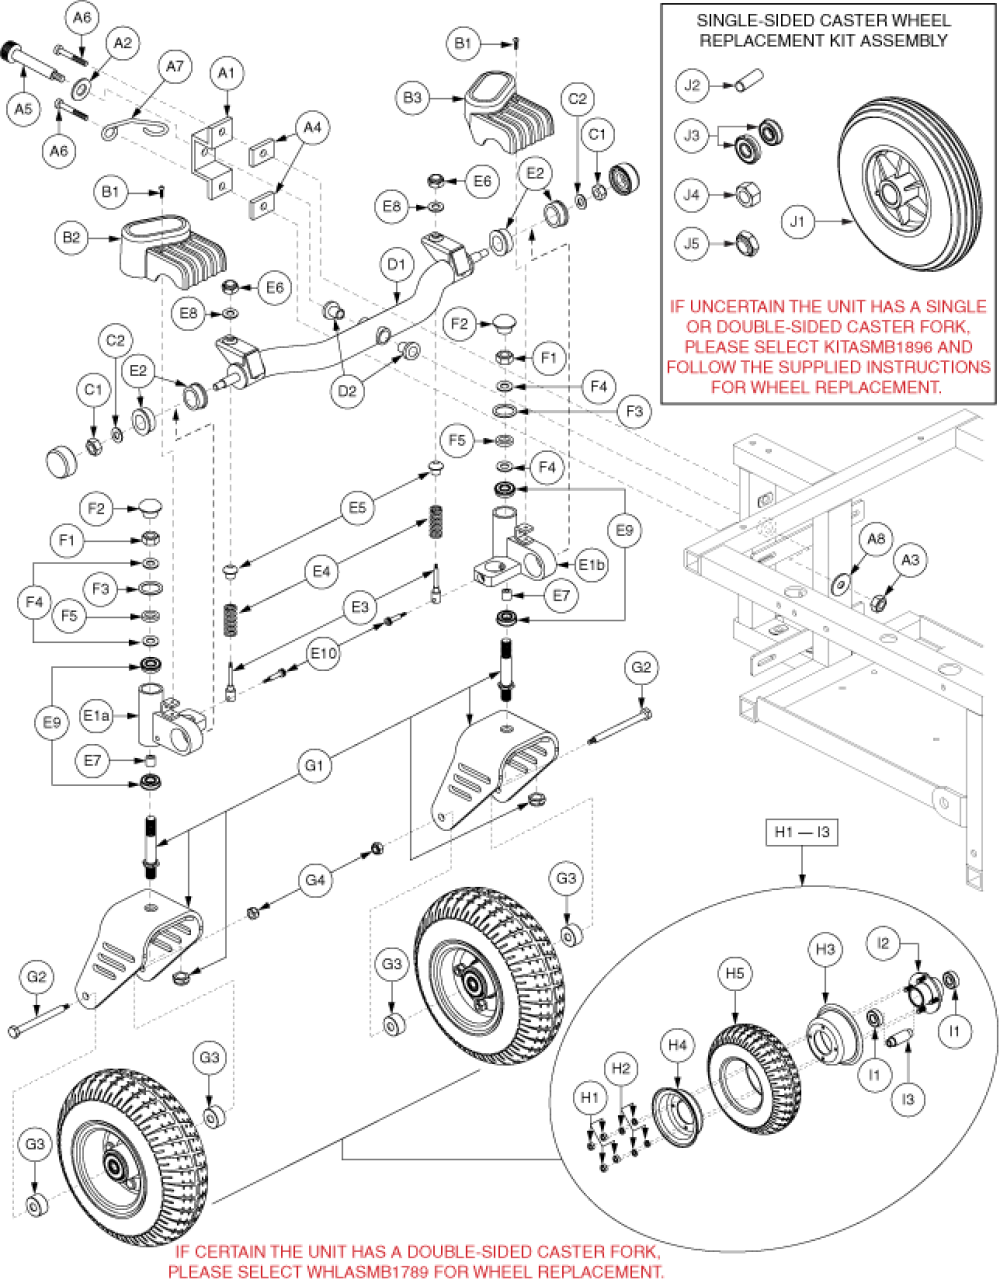 Articulating Beam Assembly - Flat-free parts diagram